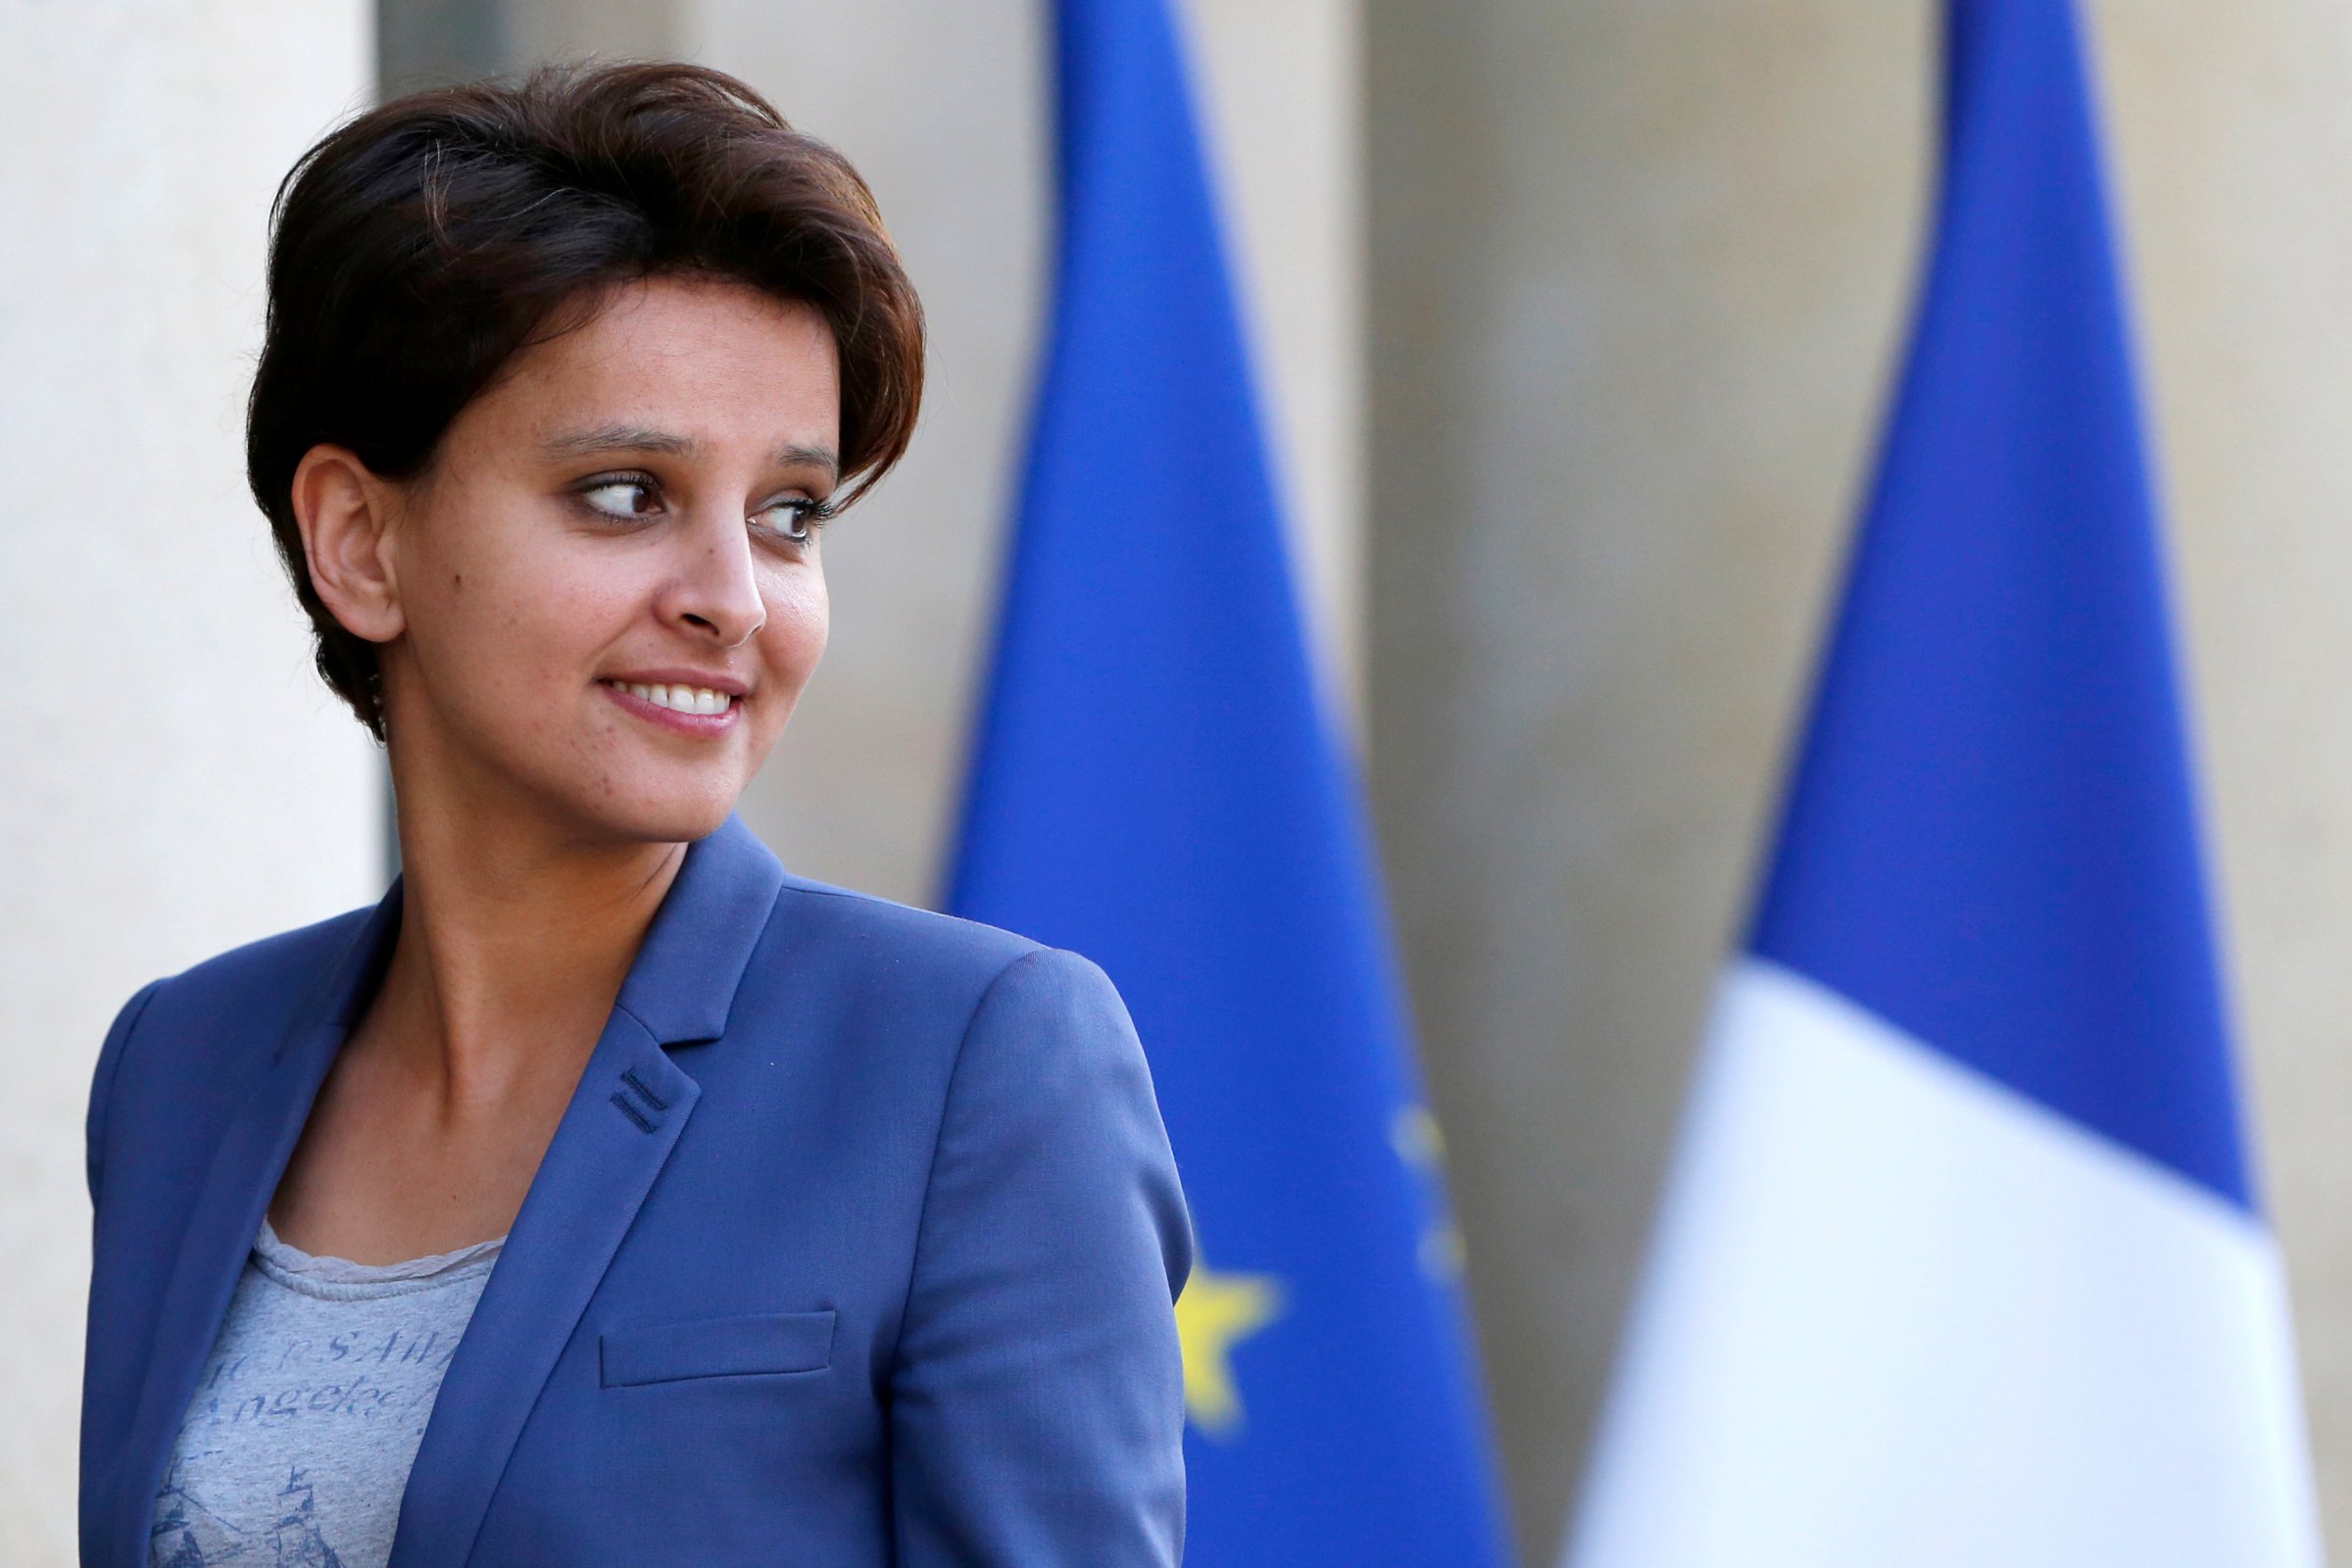 France's Women, Youth and Sports Minister Najat Vallaud-Belkacem arrives to attend a dinner at the Elysee Palace in Paris May 5, 2014.